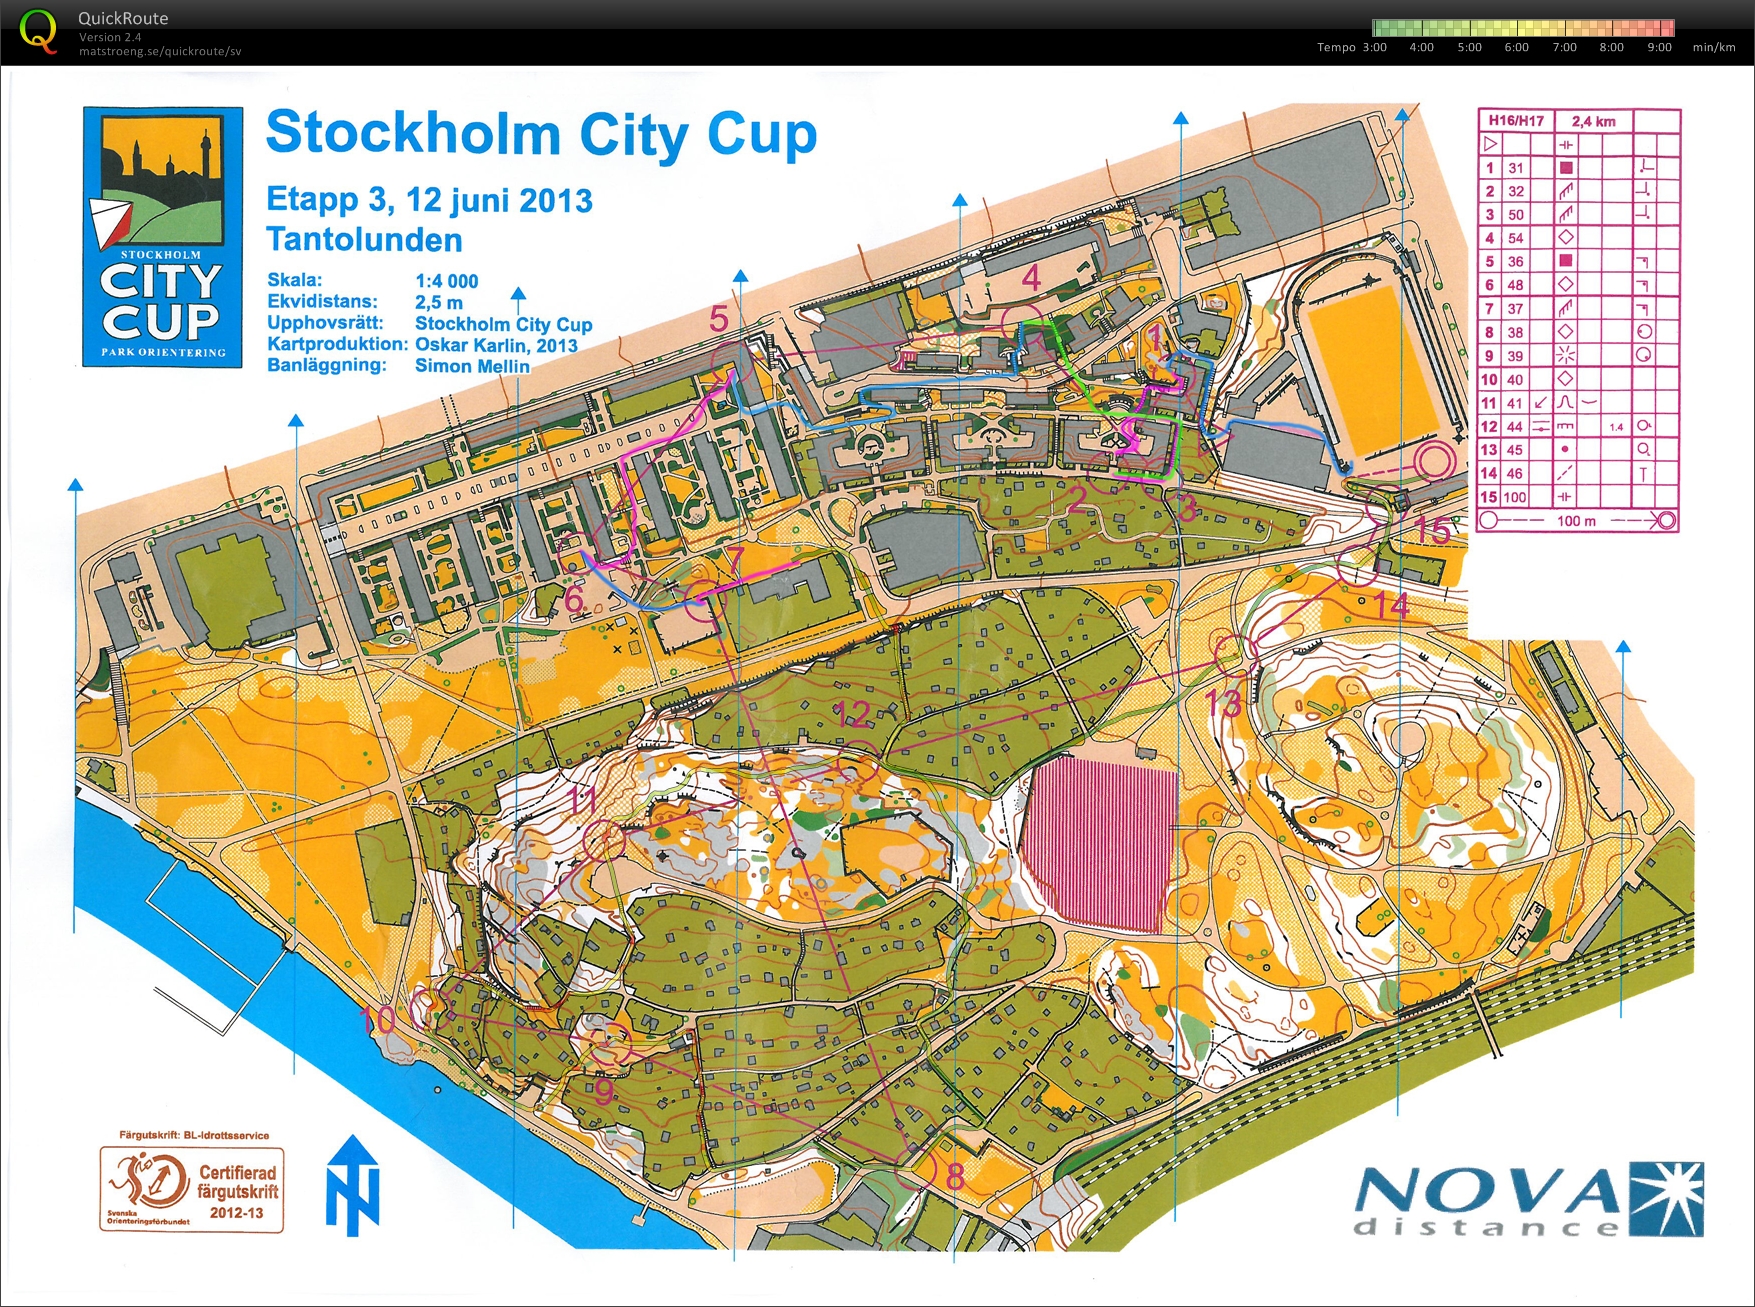 Stockholm City Cup - Tanto (12.06.2013)